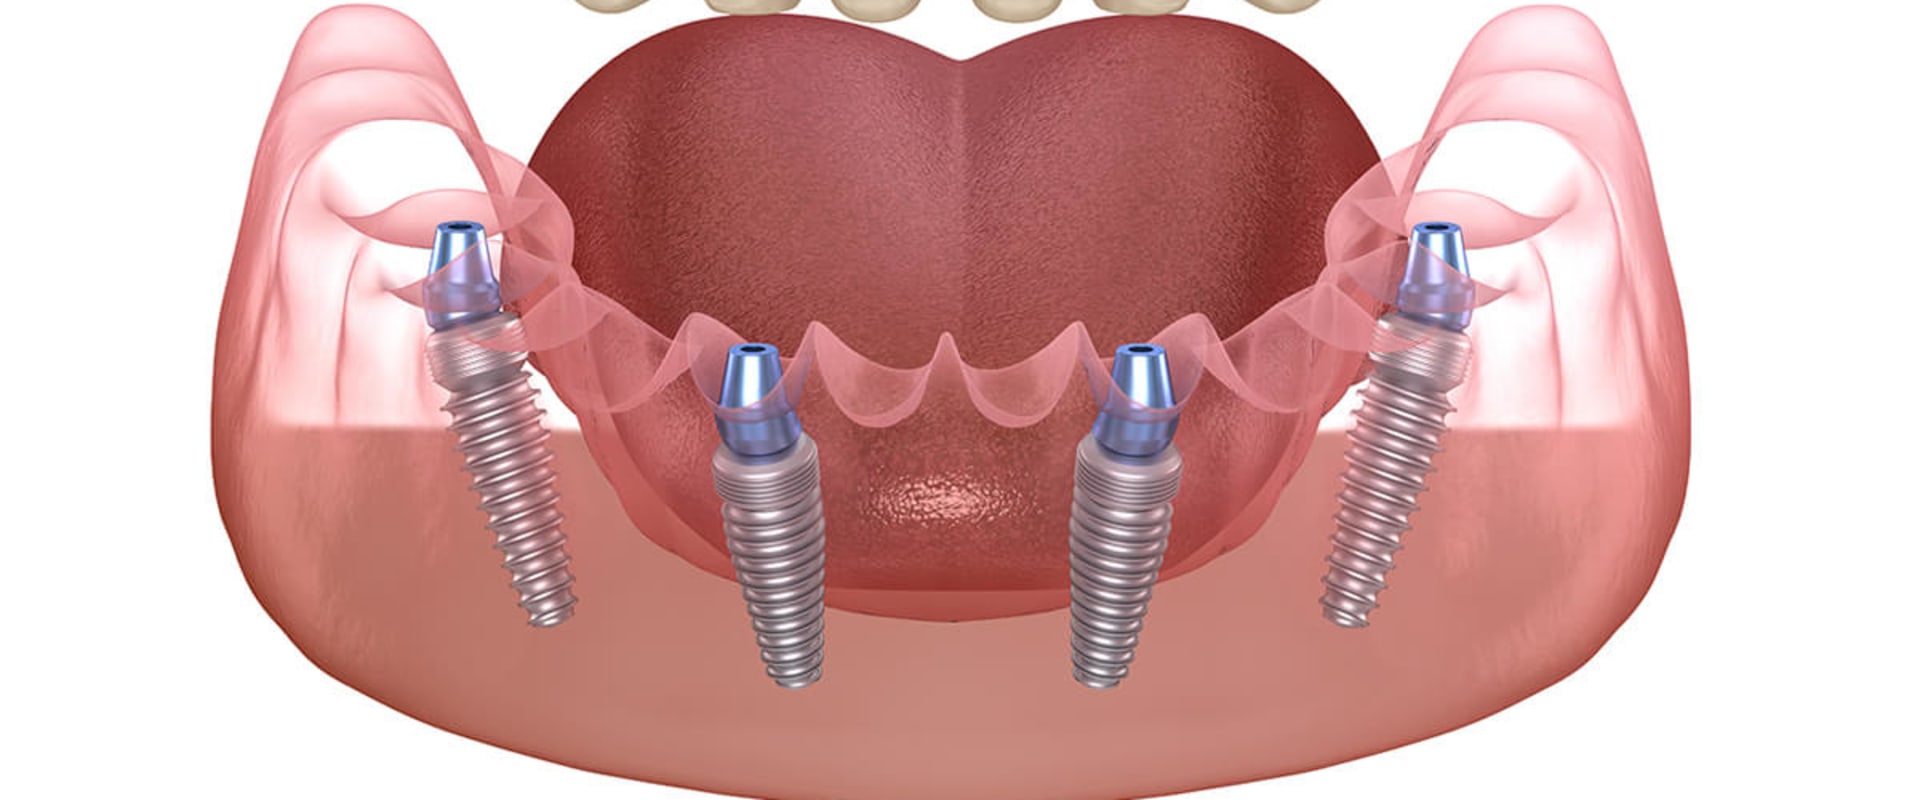 What Are the Risks of All-on-4 Dental Implants?